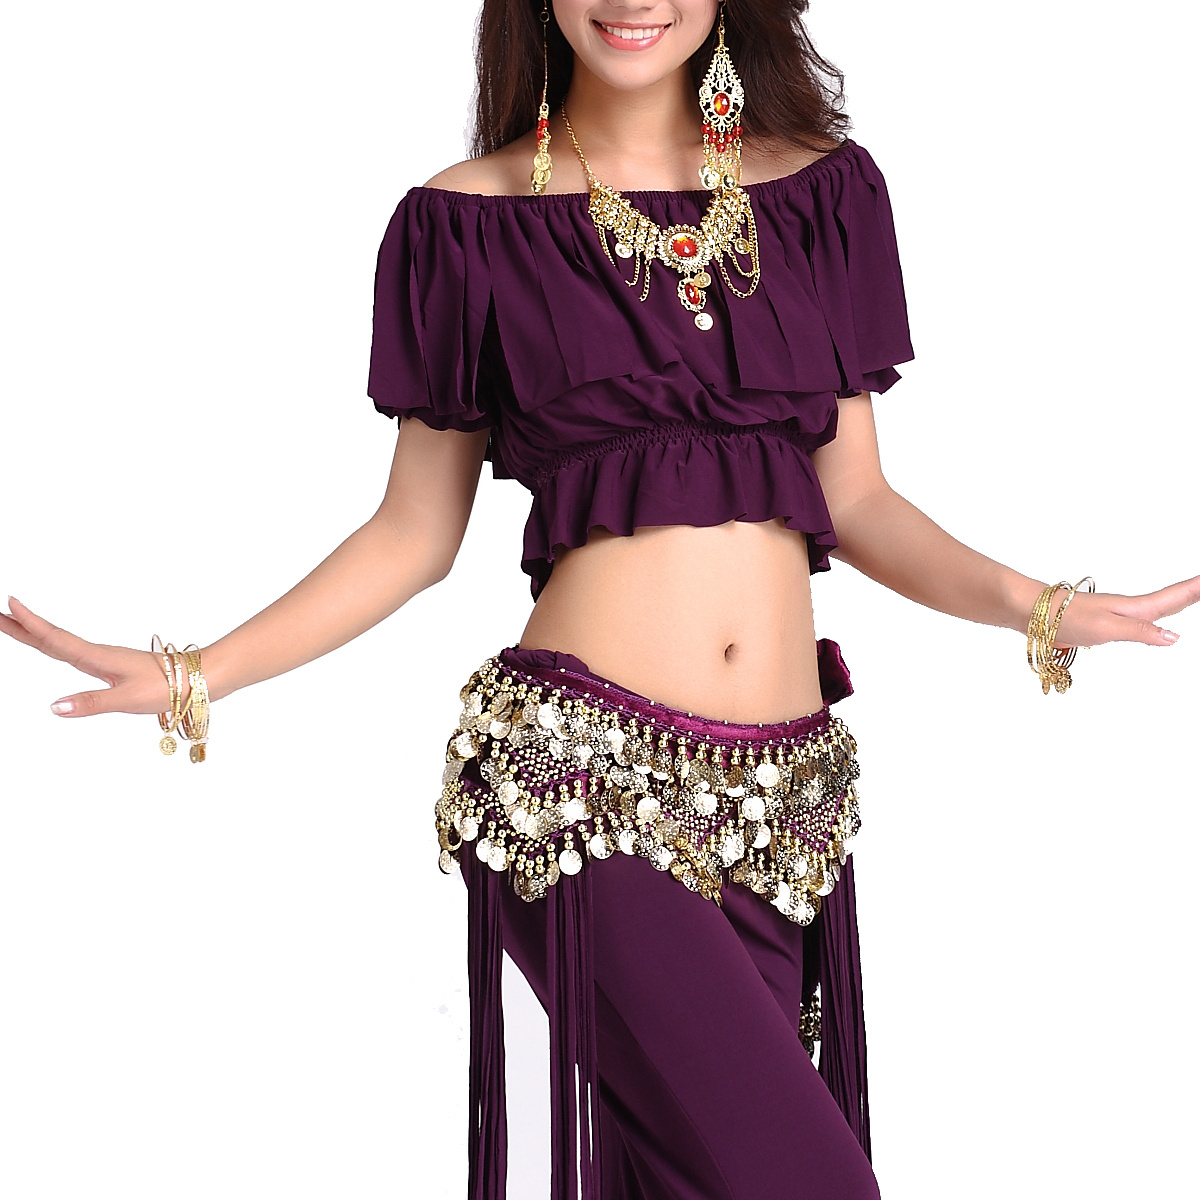 Belly Dance Hip Scarf Wrap Skirt For Women Rave Outfit With Gold Coins And  Beads Accessories Of Halloween Costume Festival Clothing Wrap Hip Skirt Wit